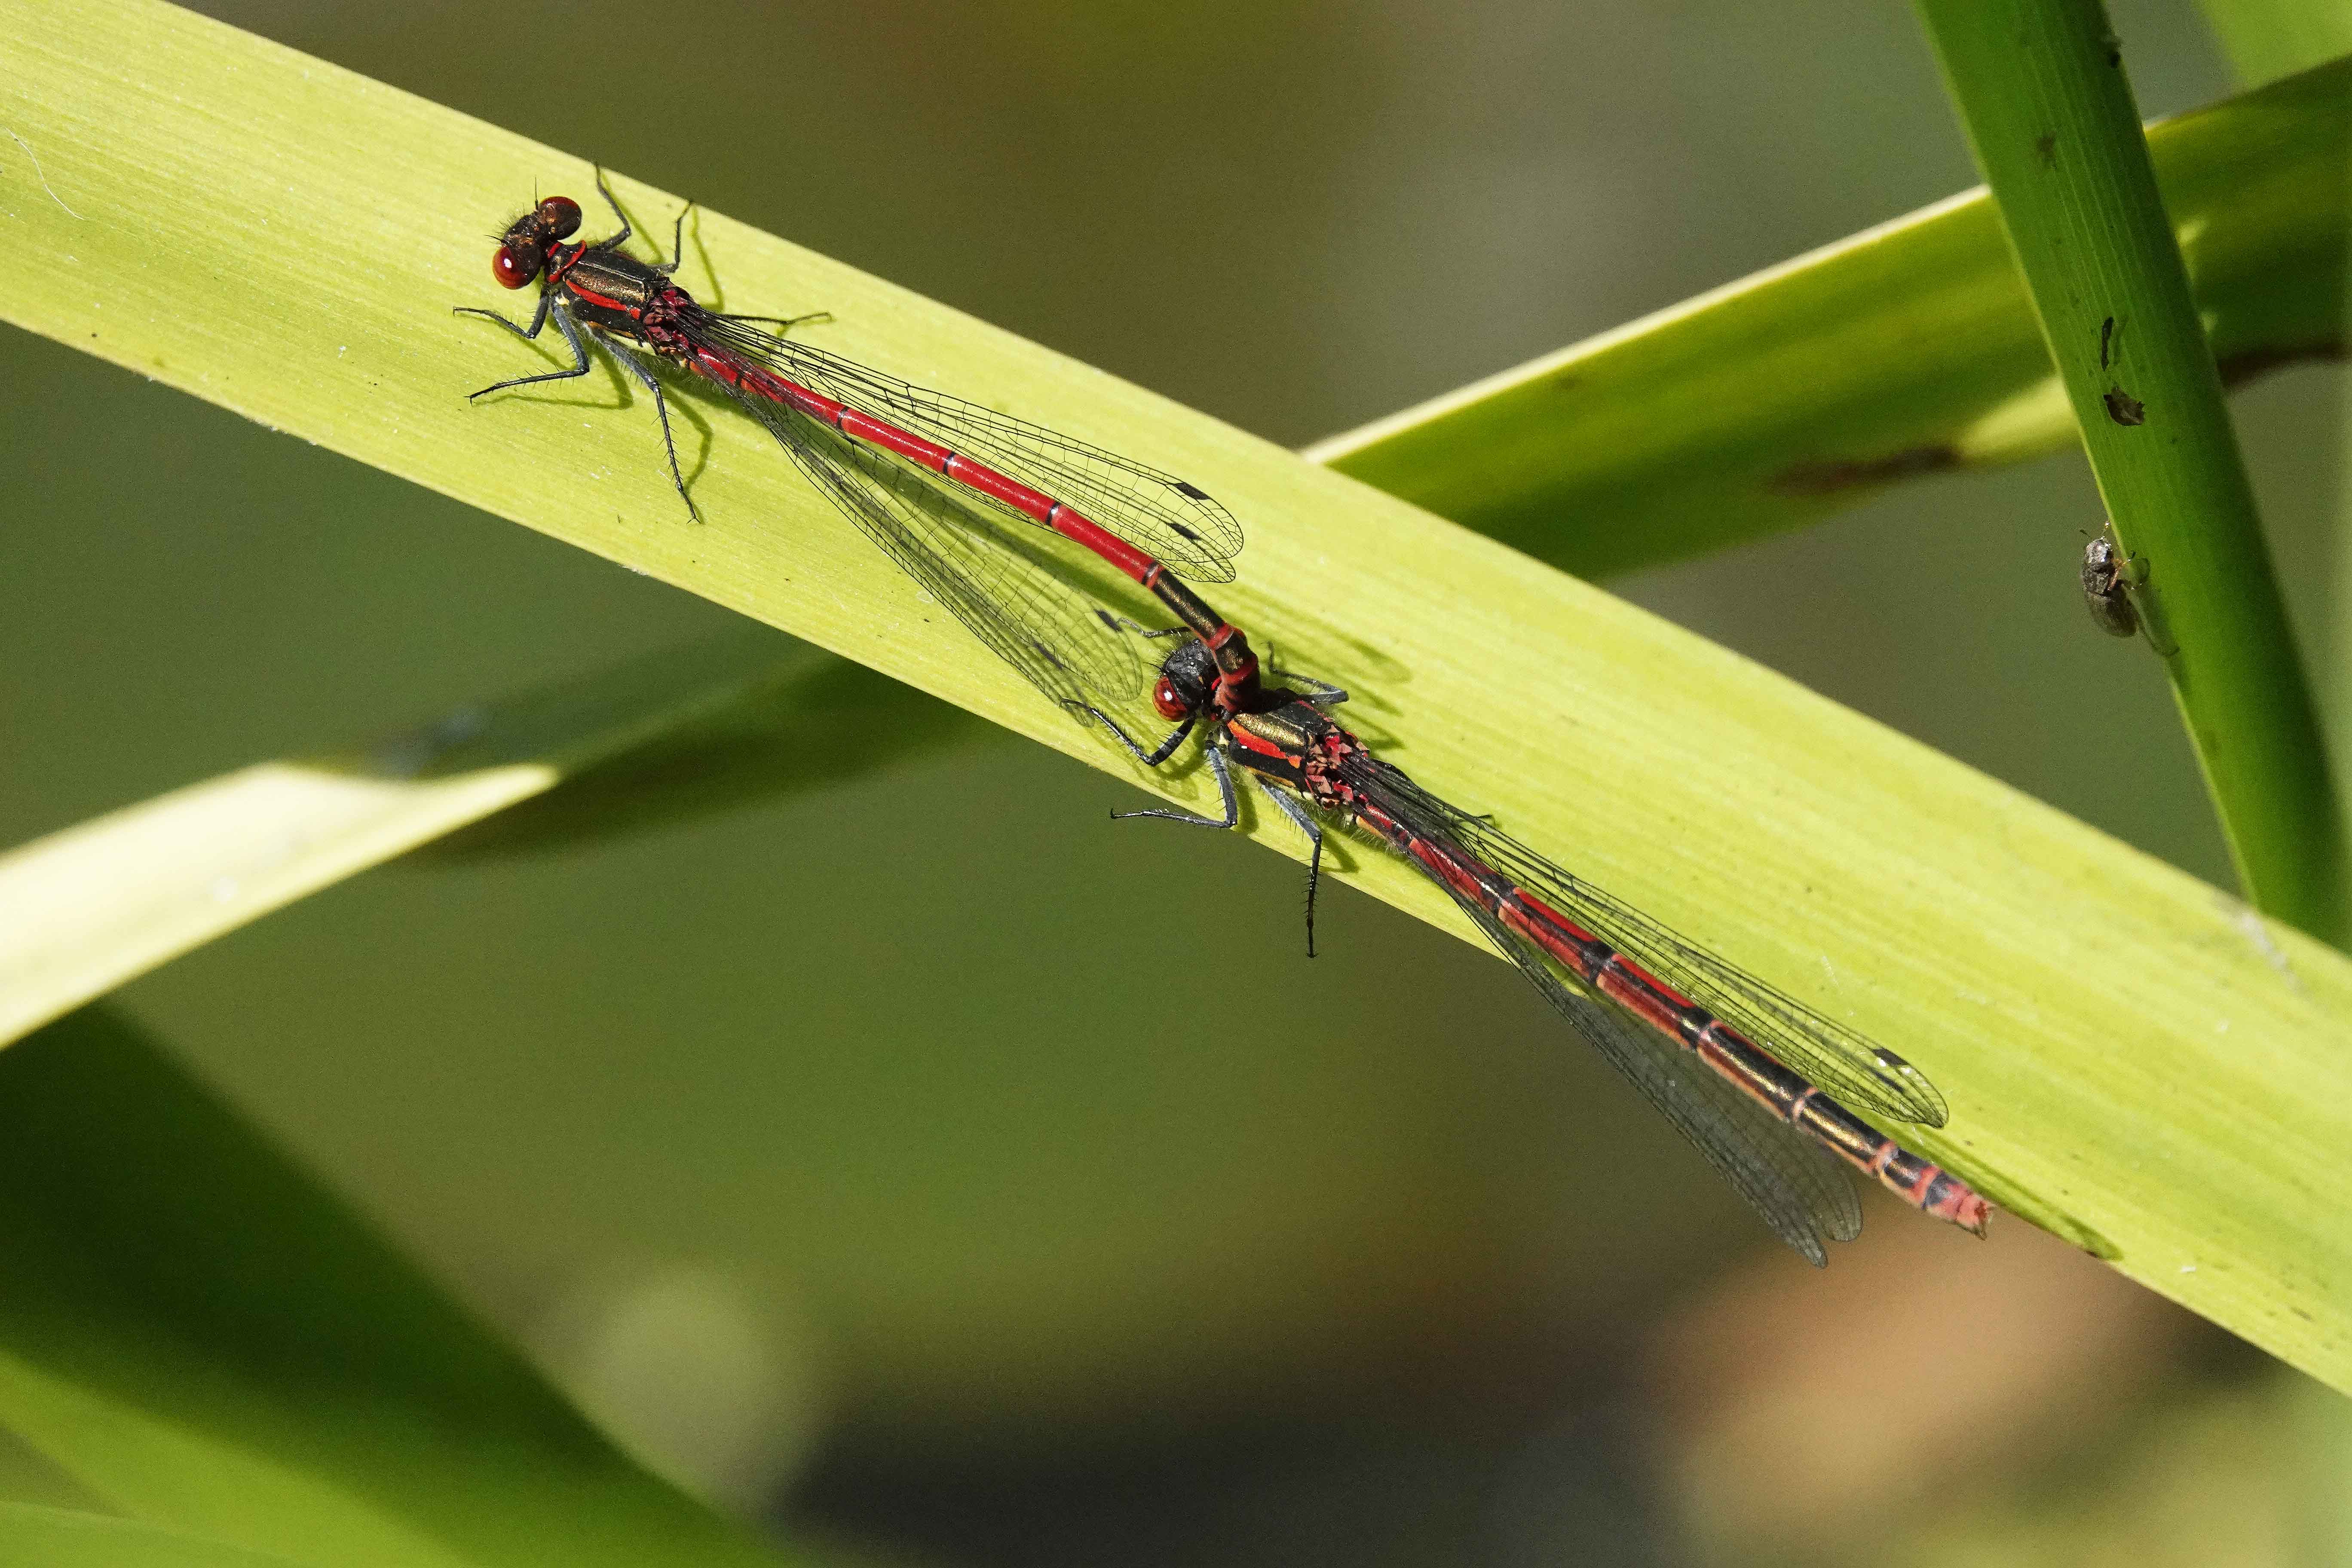 Large-Red-Damselfly-coupling-Shropshire-2020-Keith-Offord-lo-res.jpg